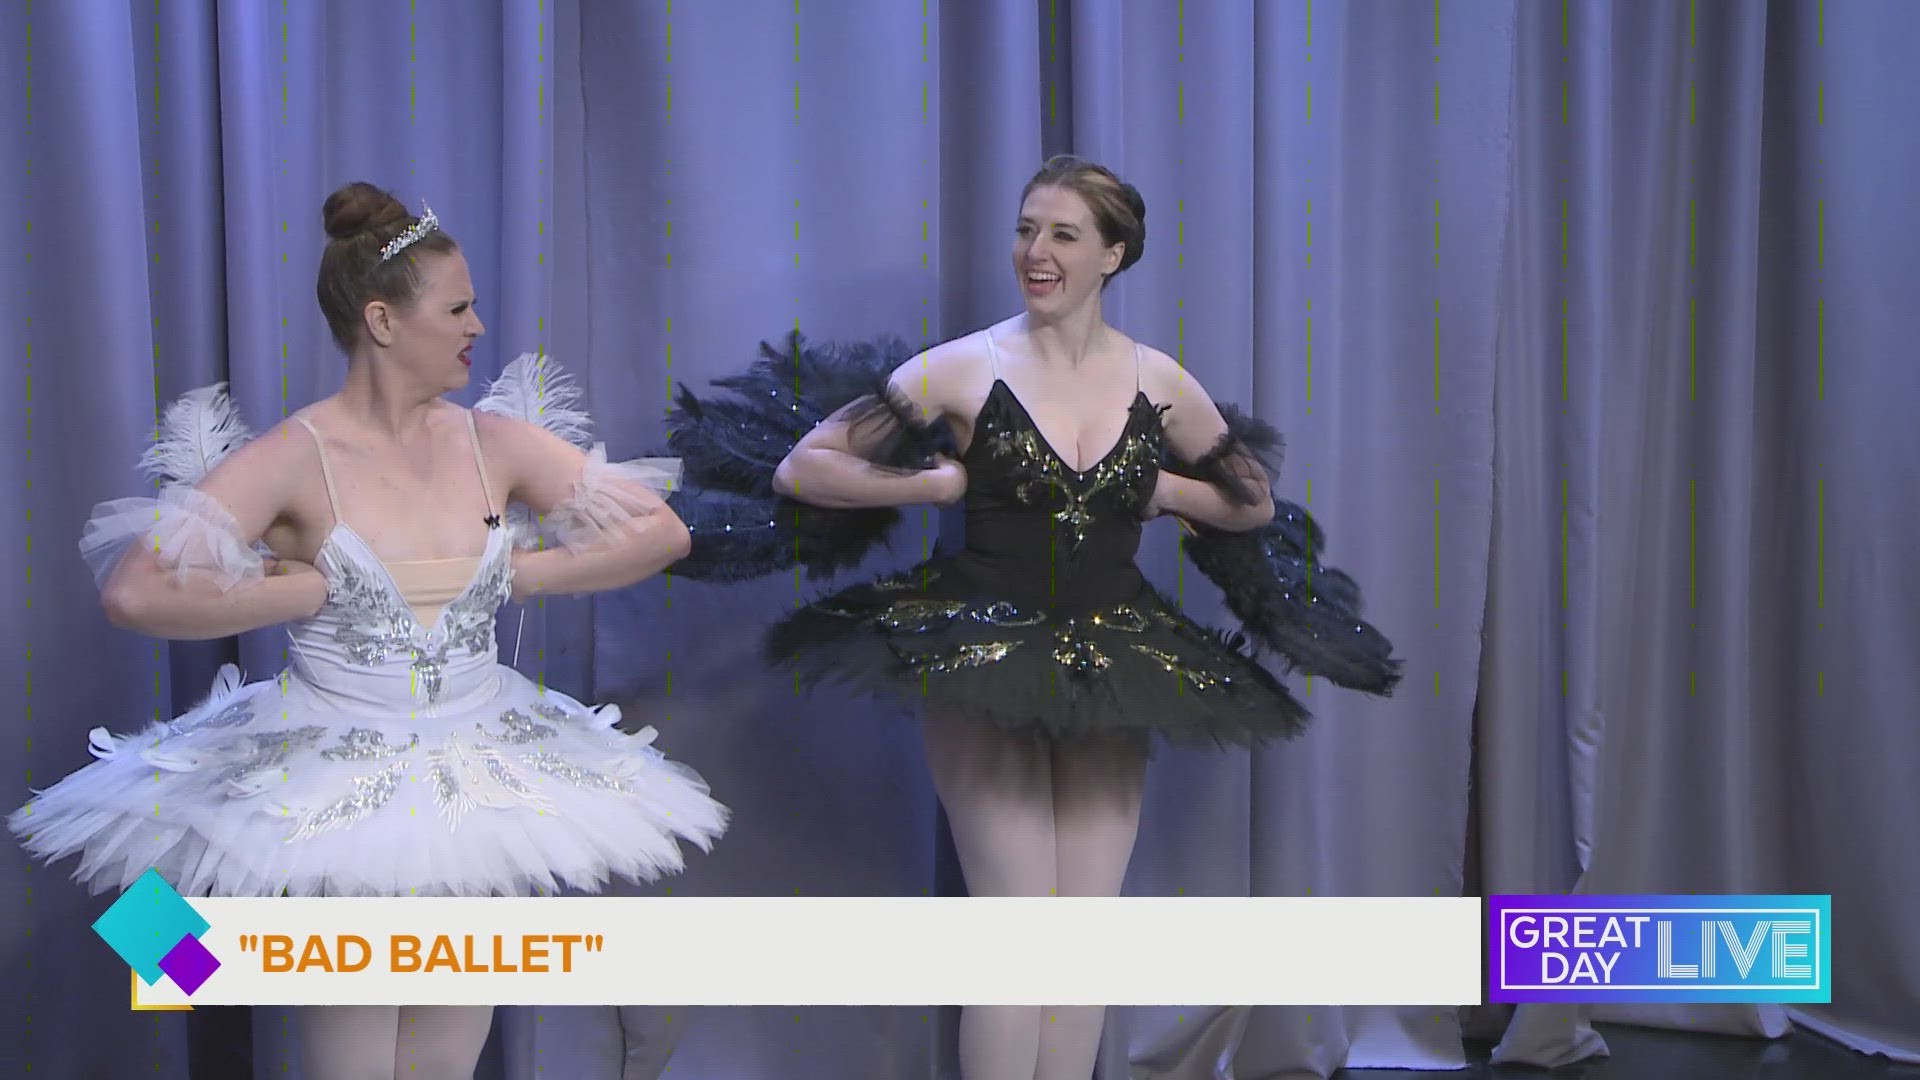 The Scarlet Lotus Cabaret is putting on a comedic take on ballet called Bad Ballet, from March 29th-31st.